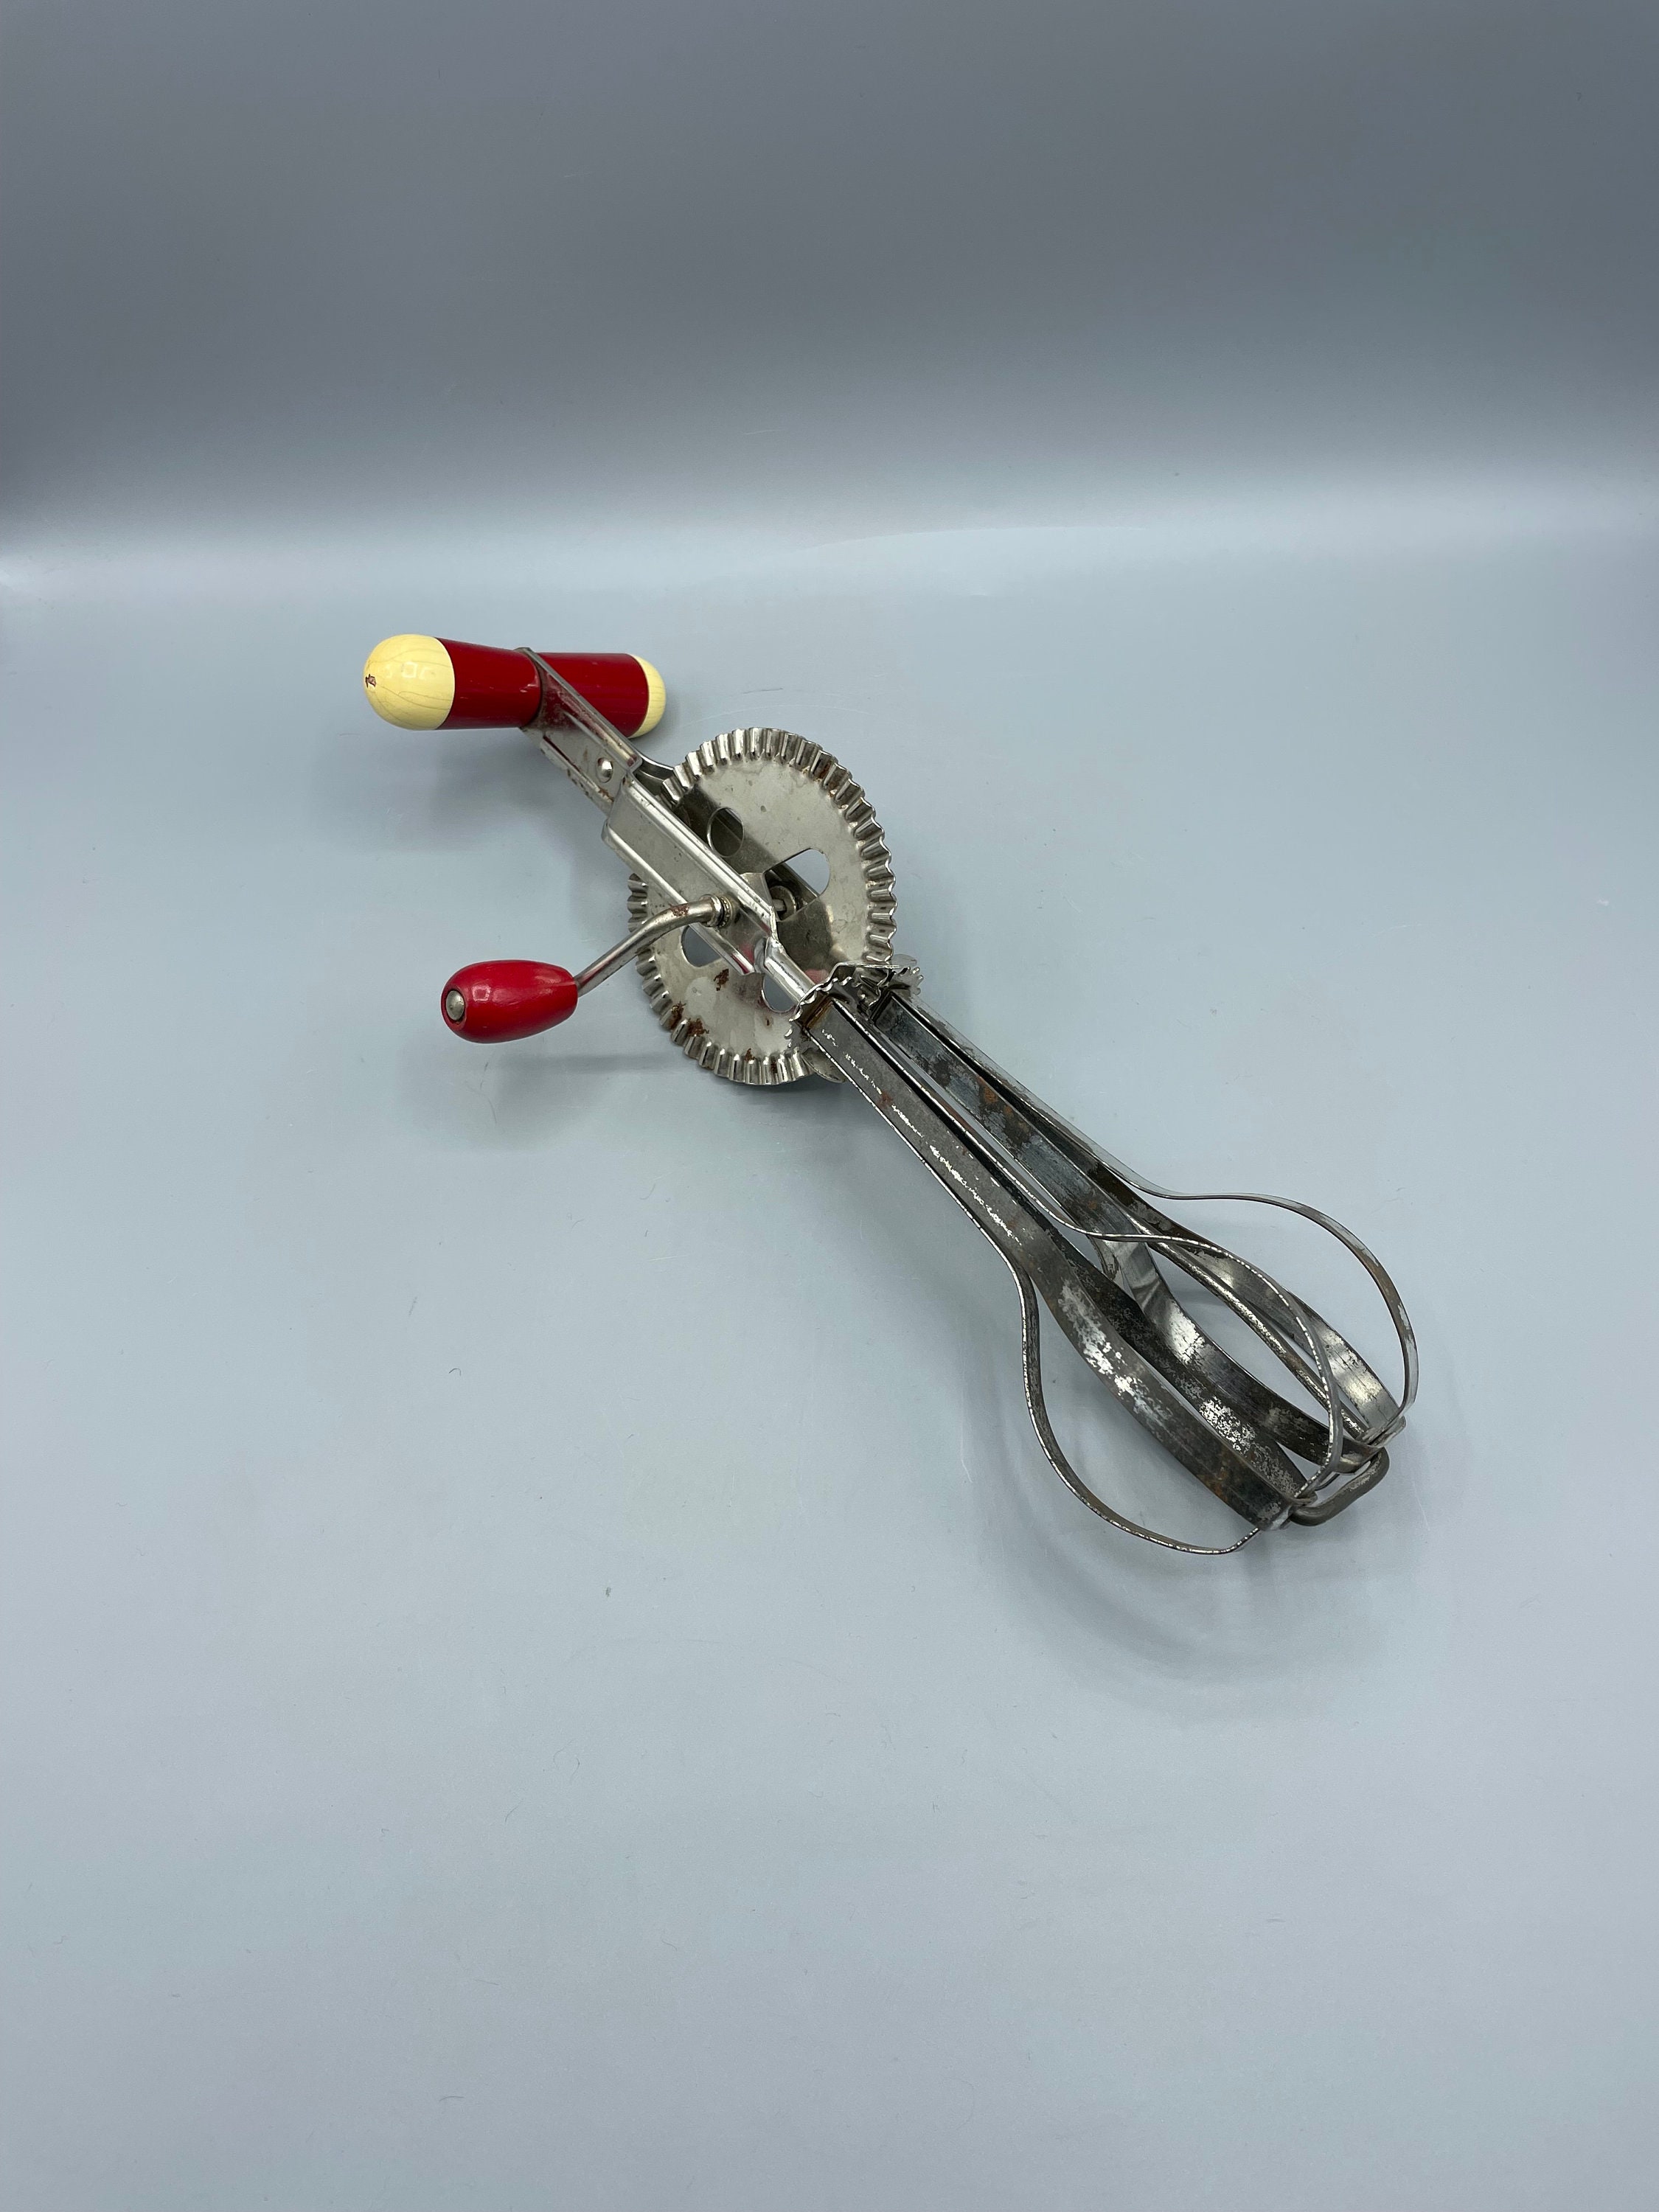 Vintage 1950's A&J Green Yellow Handle Hand Mixer Egg Beater Made in the  USA Shabby Cottage Kitchen /shop/alexlittlethings 